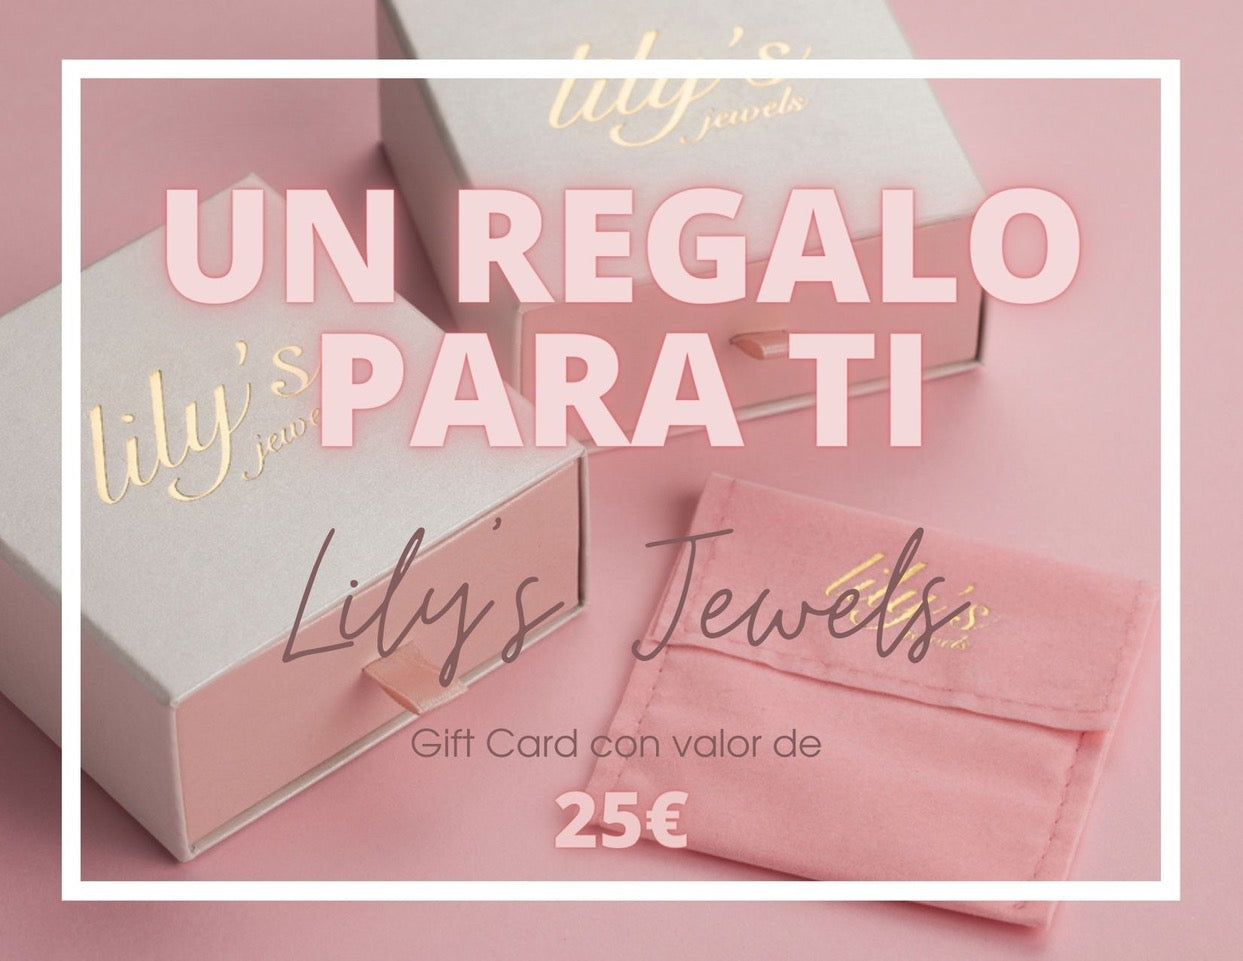 Lily's Jewels Gift Card